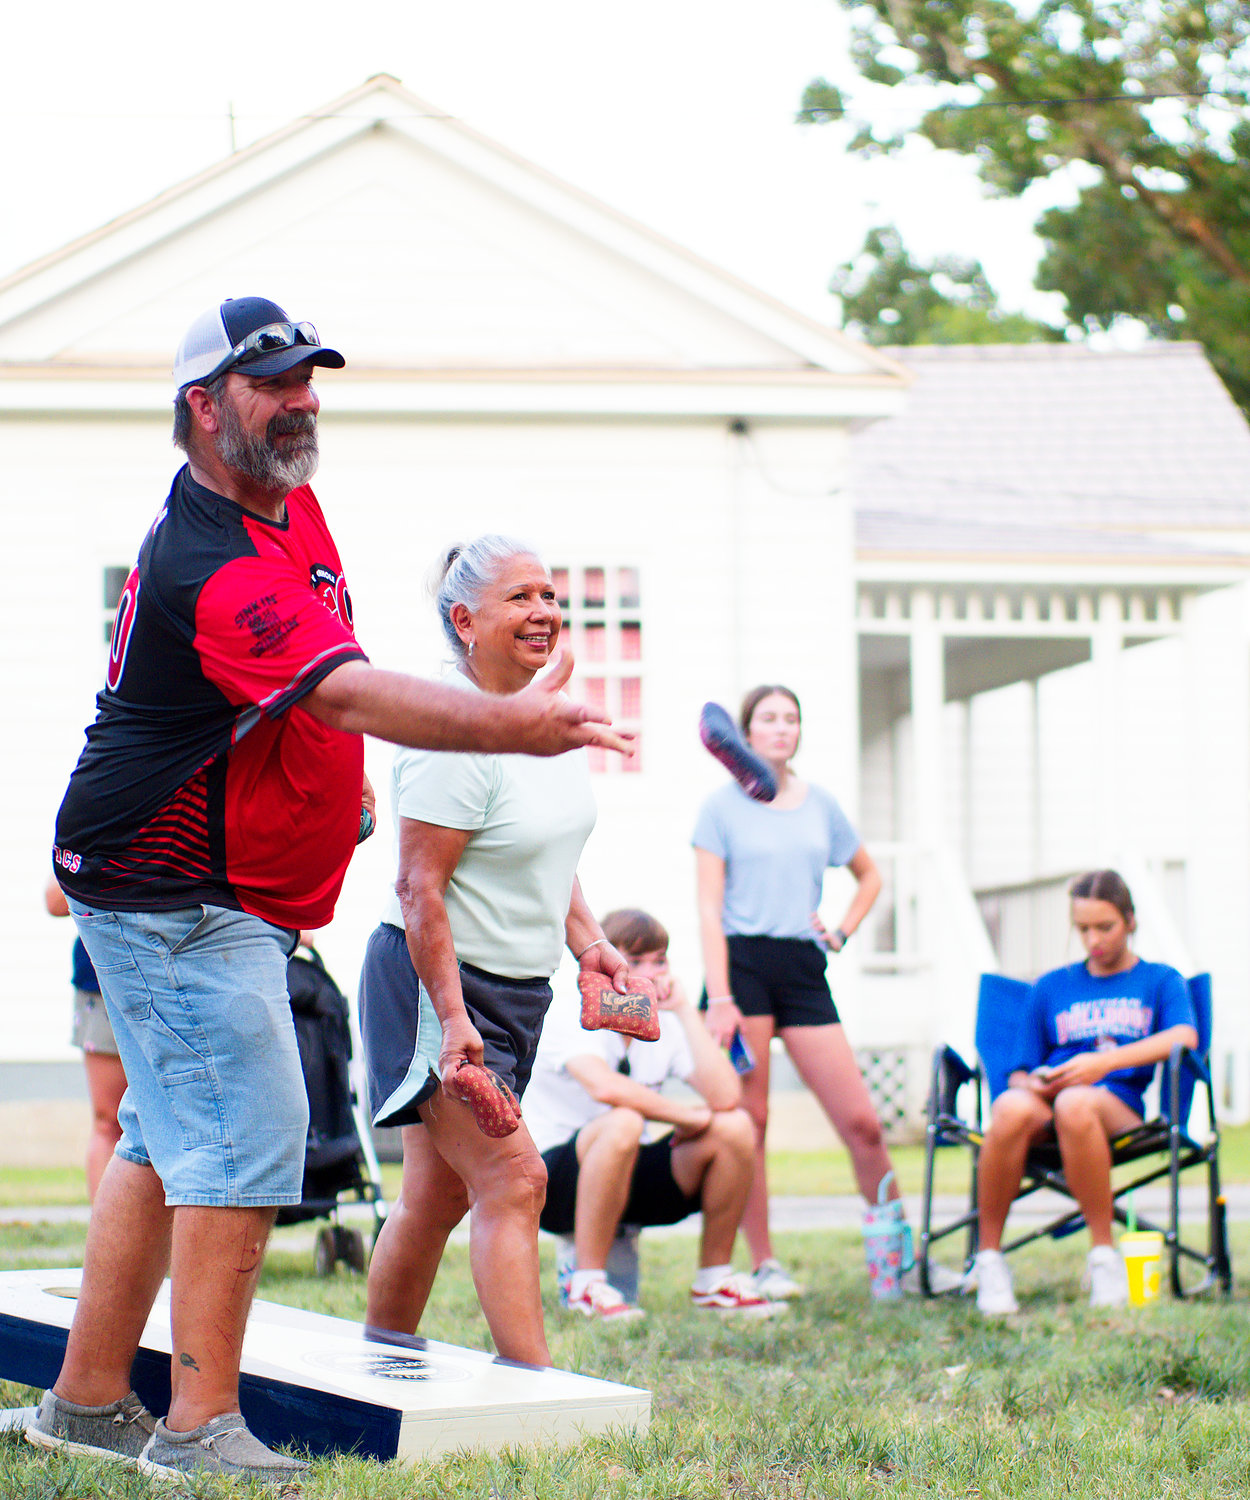 Aaron Graham of Alba tosses a bag during the championship match of the chamber of commerce corn hole tournament, which he and Kyle Frances won. [see more settlers moments]